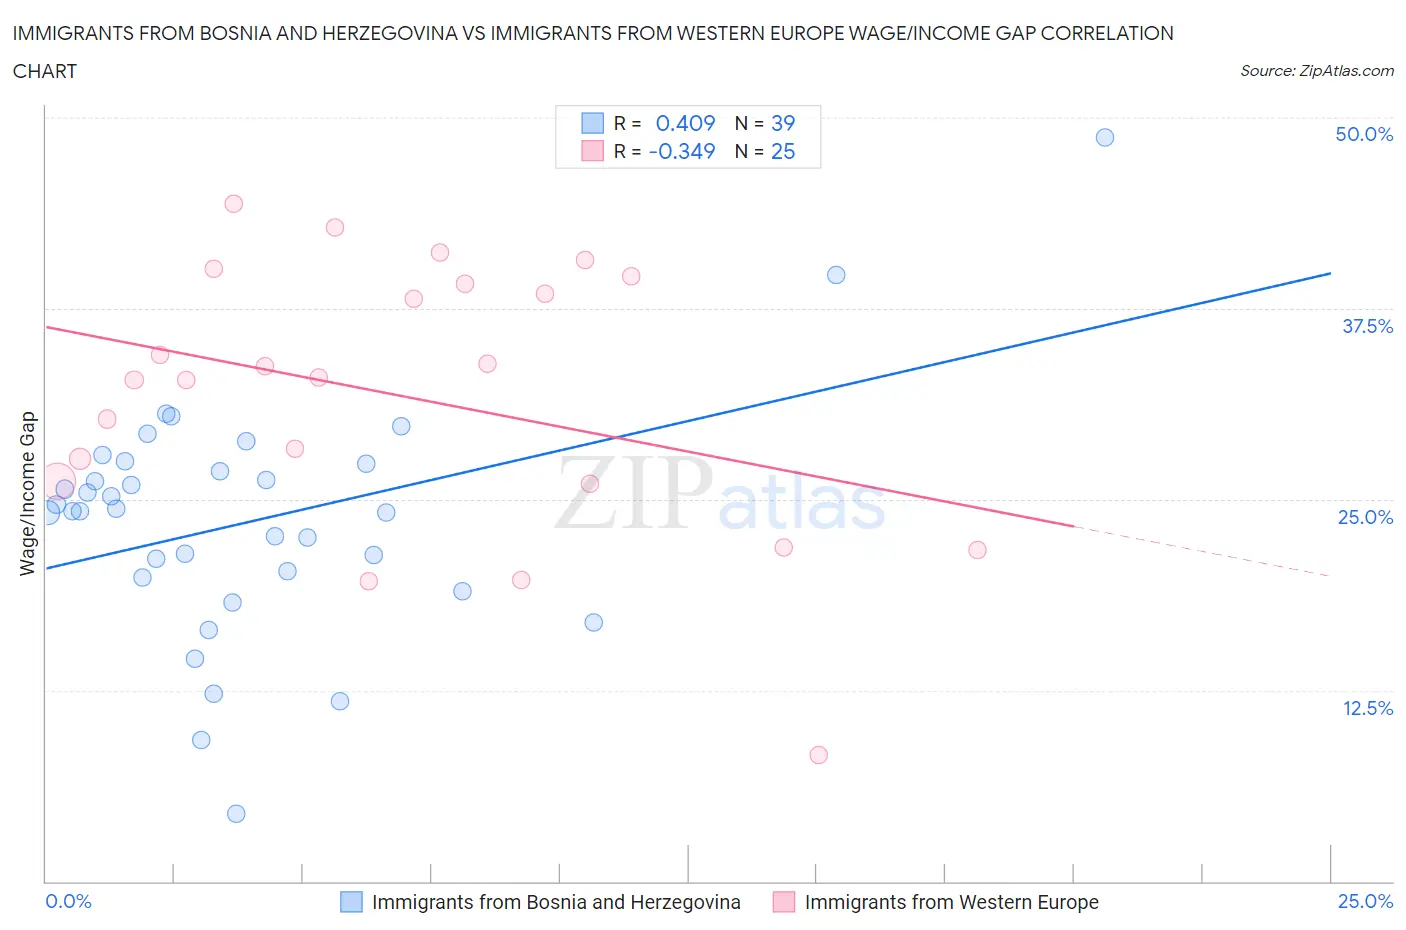 Immigrants from Bosnia and Herzegovina vs Immigrants from Western Europe Wage/Income Gap